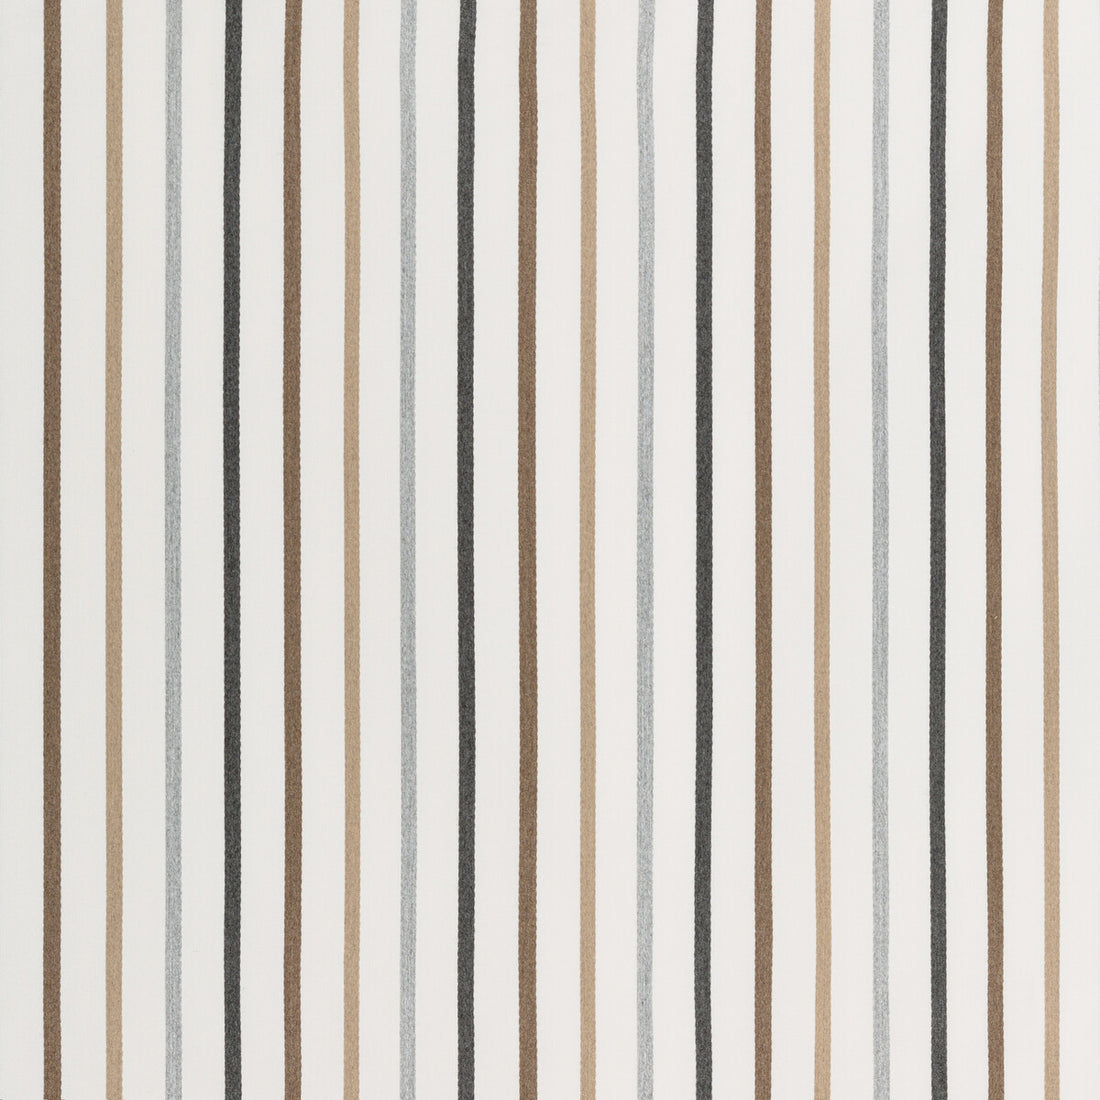 Seaton Stripe fabric in boardwalk color - pattern 35564.611.0 - by Kravet Couture in the Vista collection